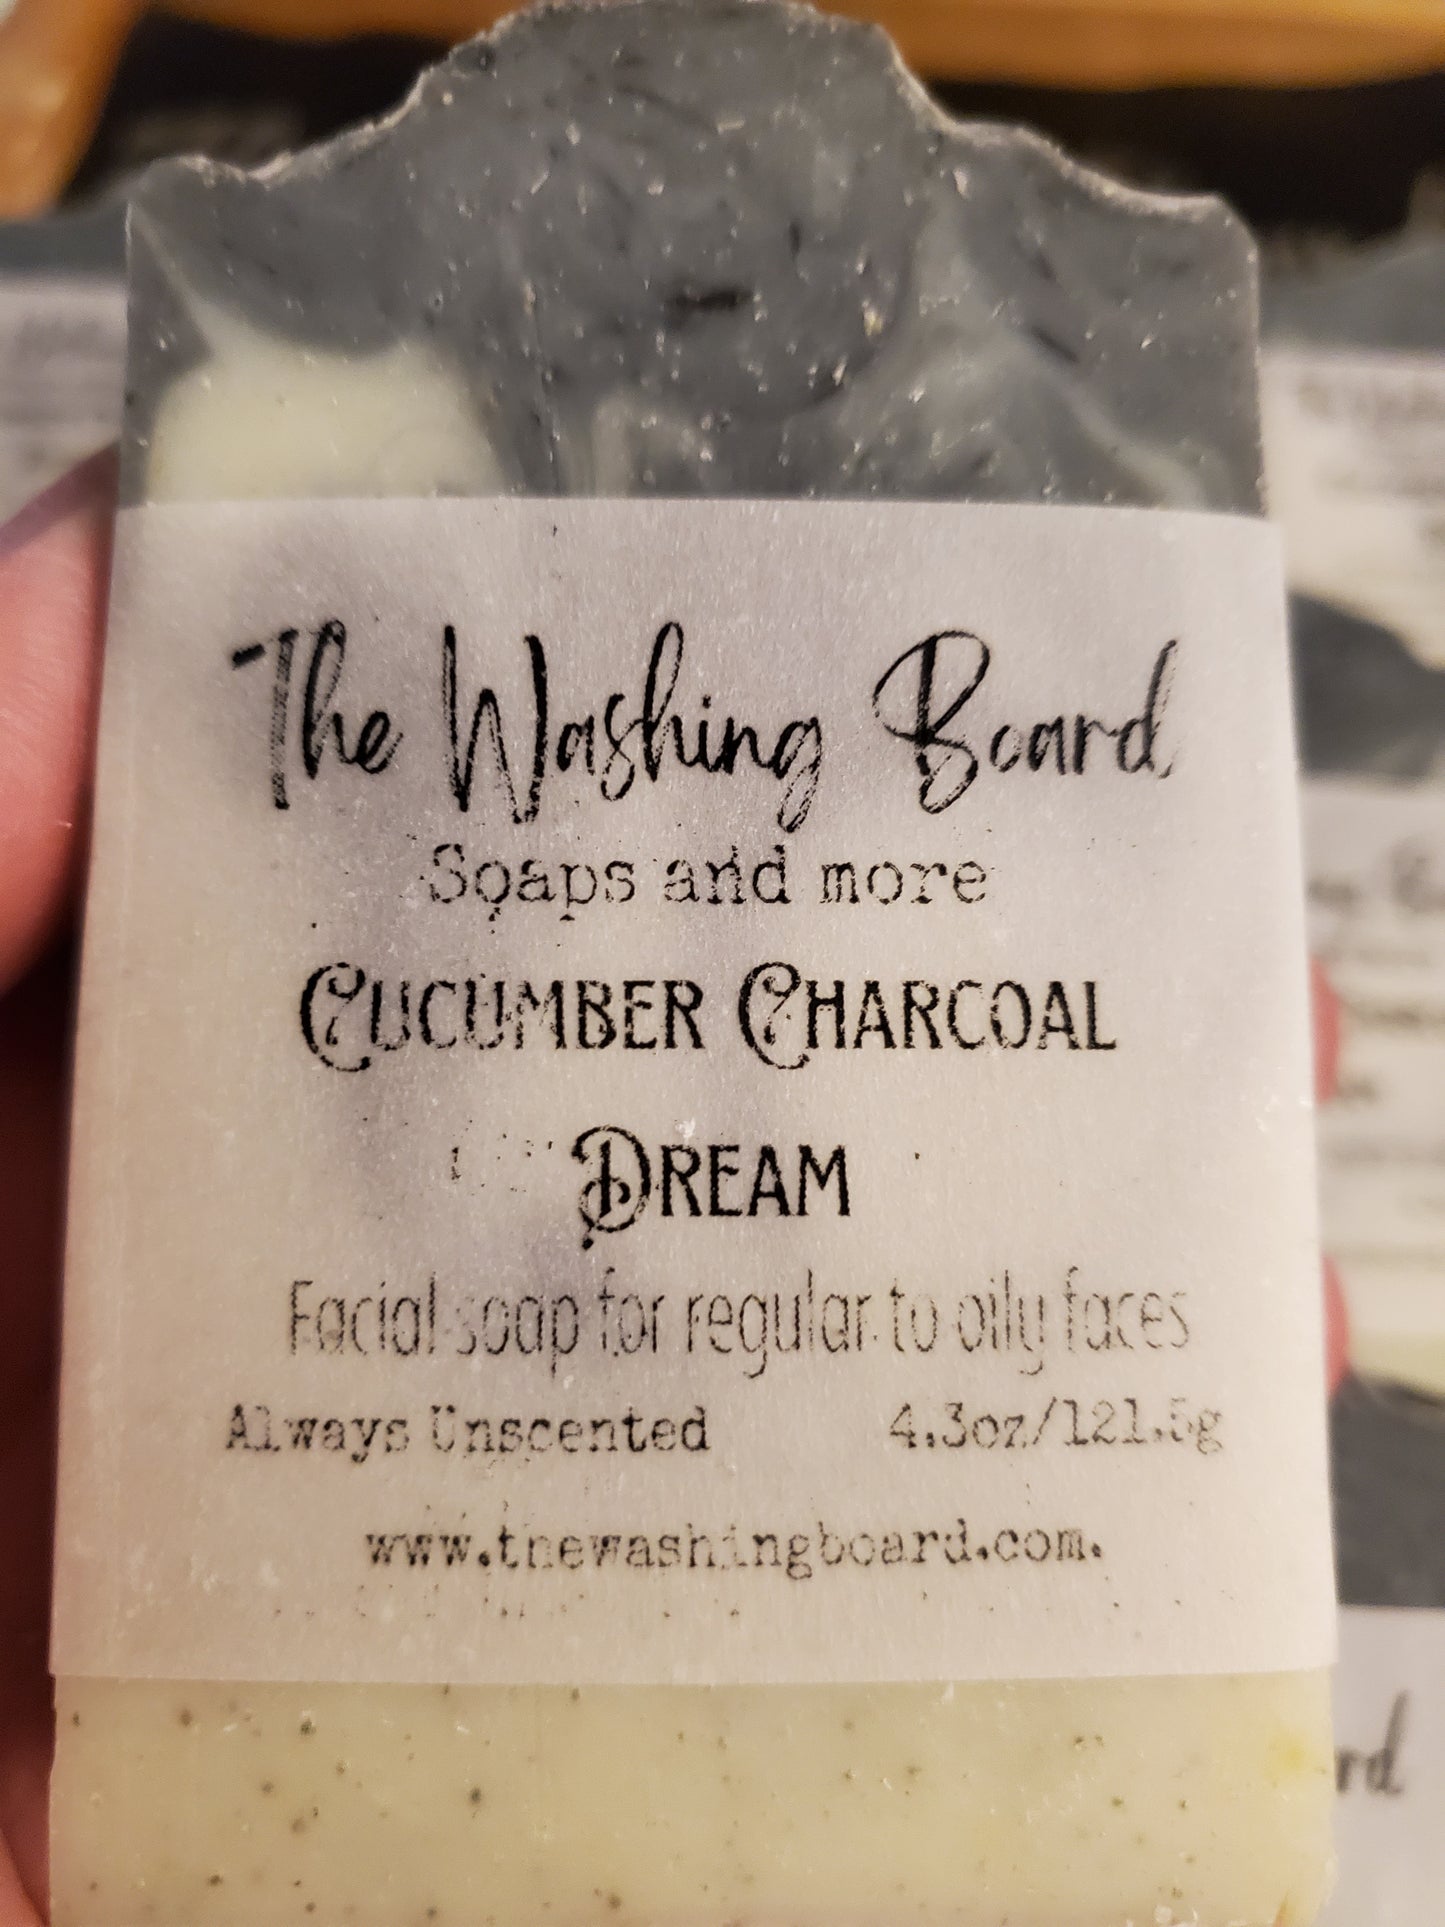 Cucumber Charcoal Dream facial soap for oily to regular faces